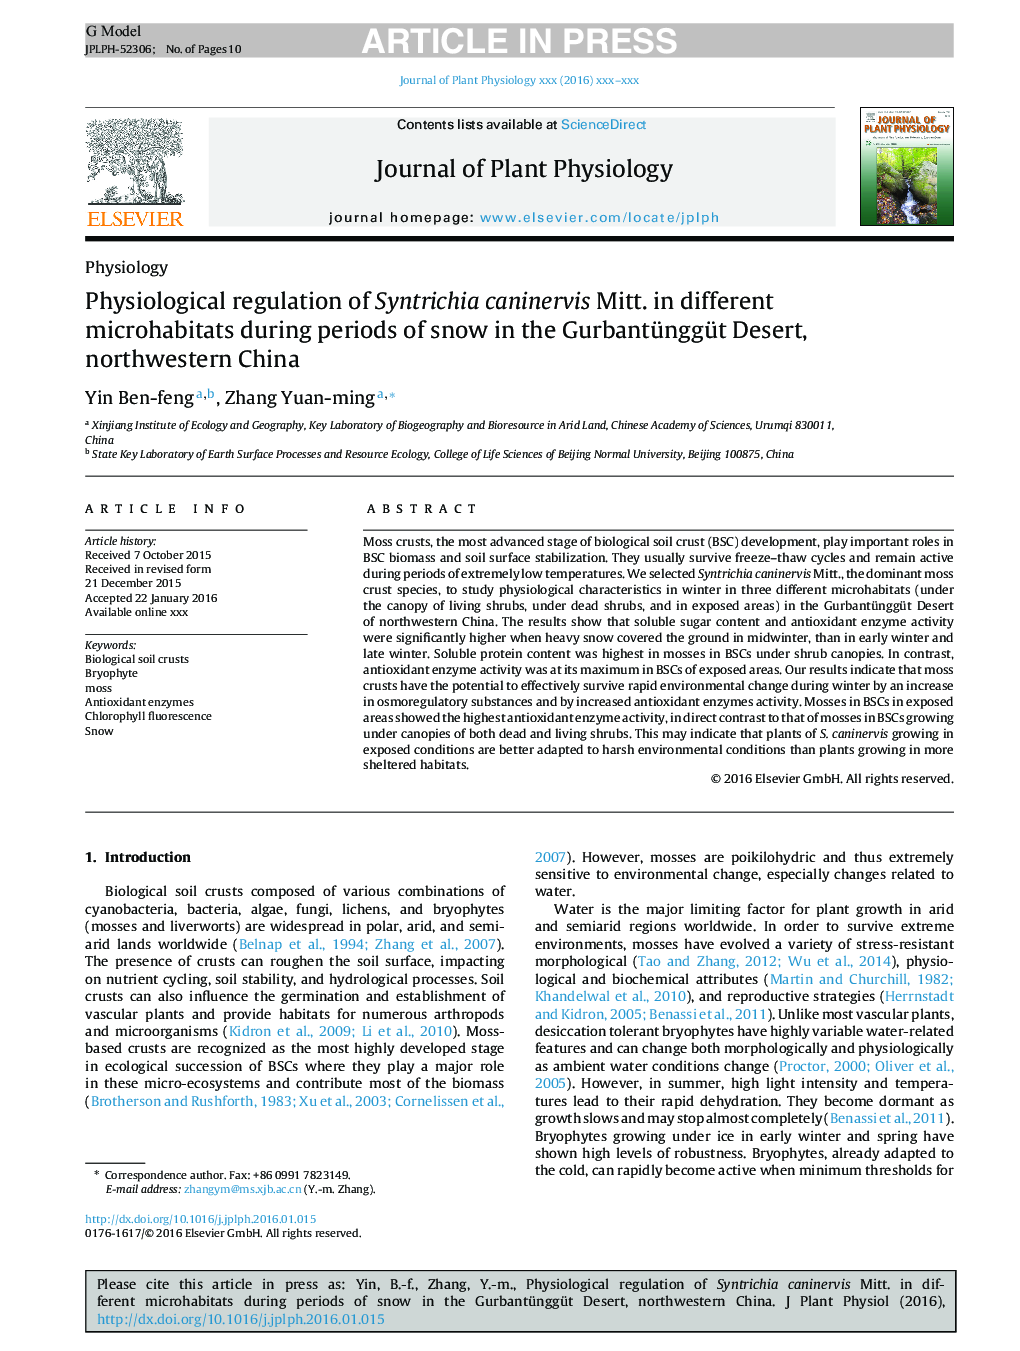 Physiological regulation of Syntrichia caninervis Mitt. in different microhabitats during periods of snow in the Gurbantünggüt Desert, northwestern China